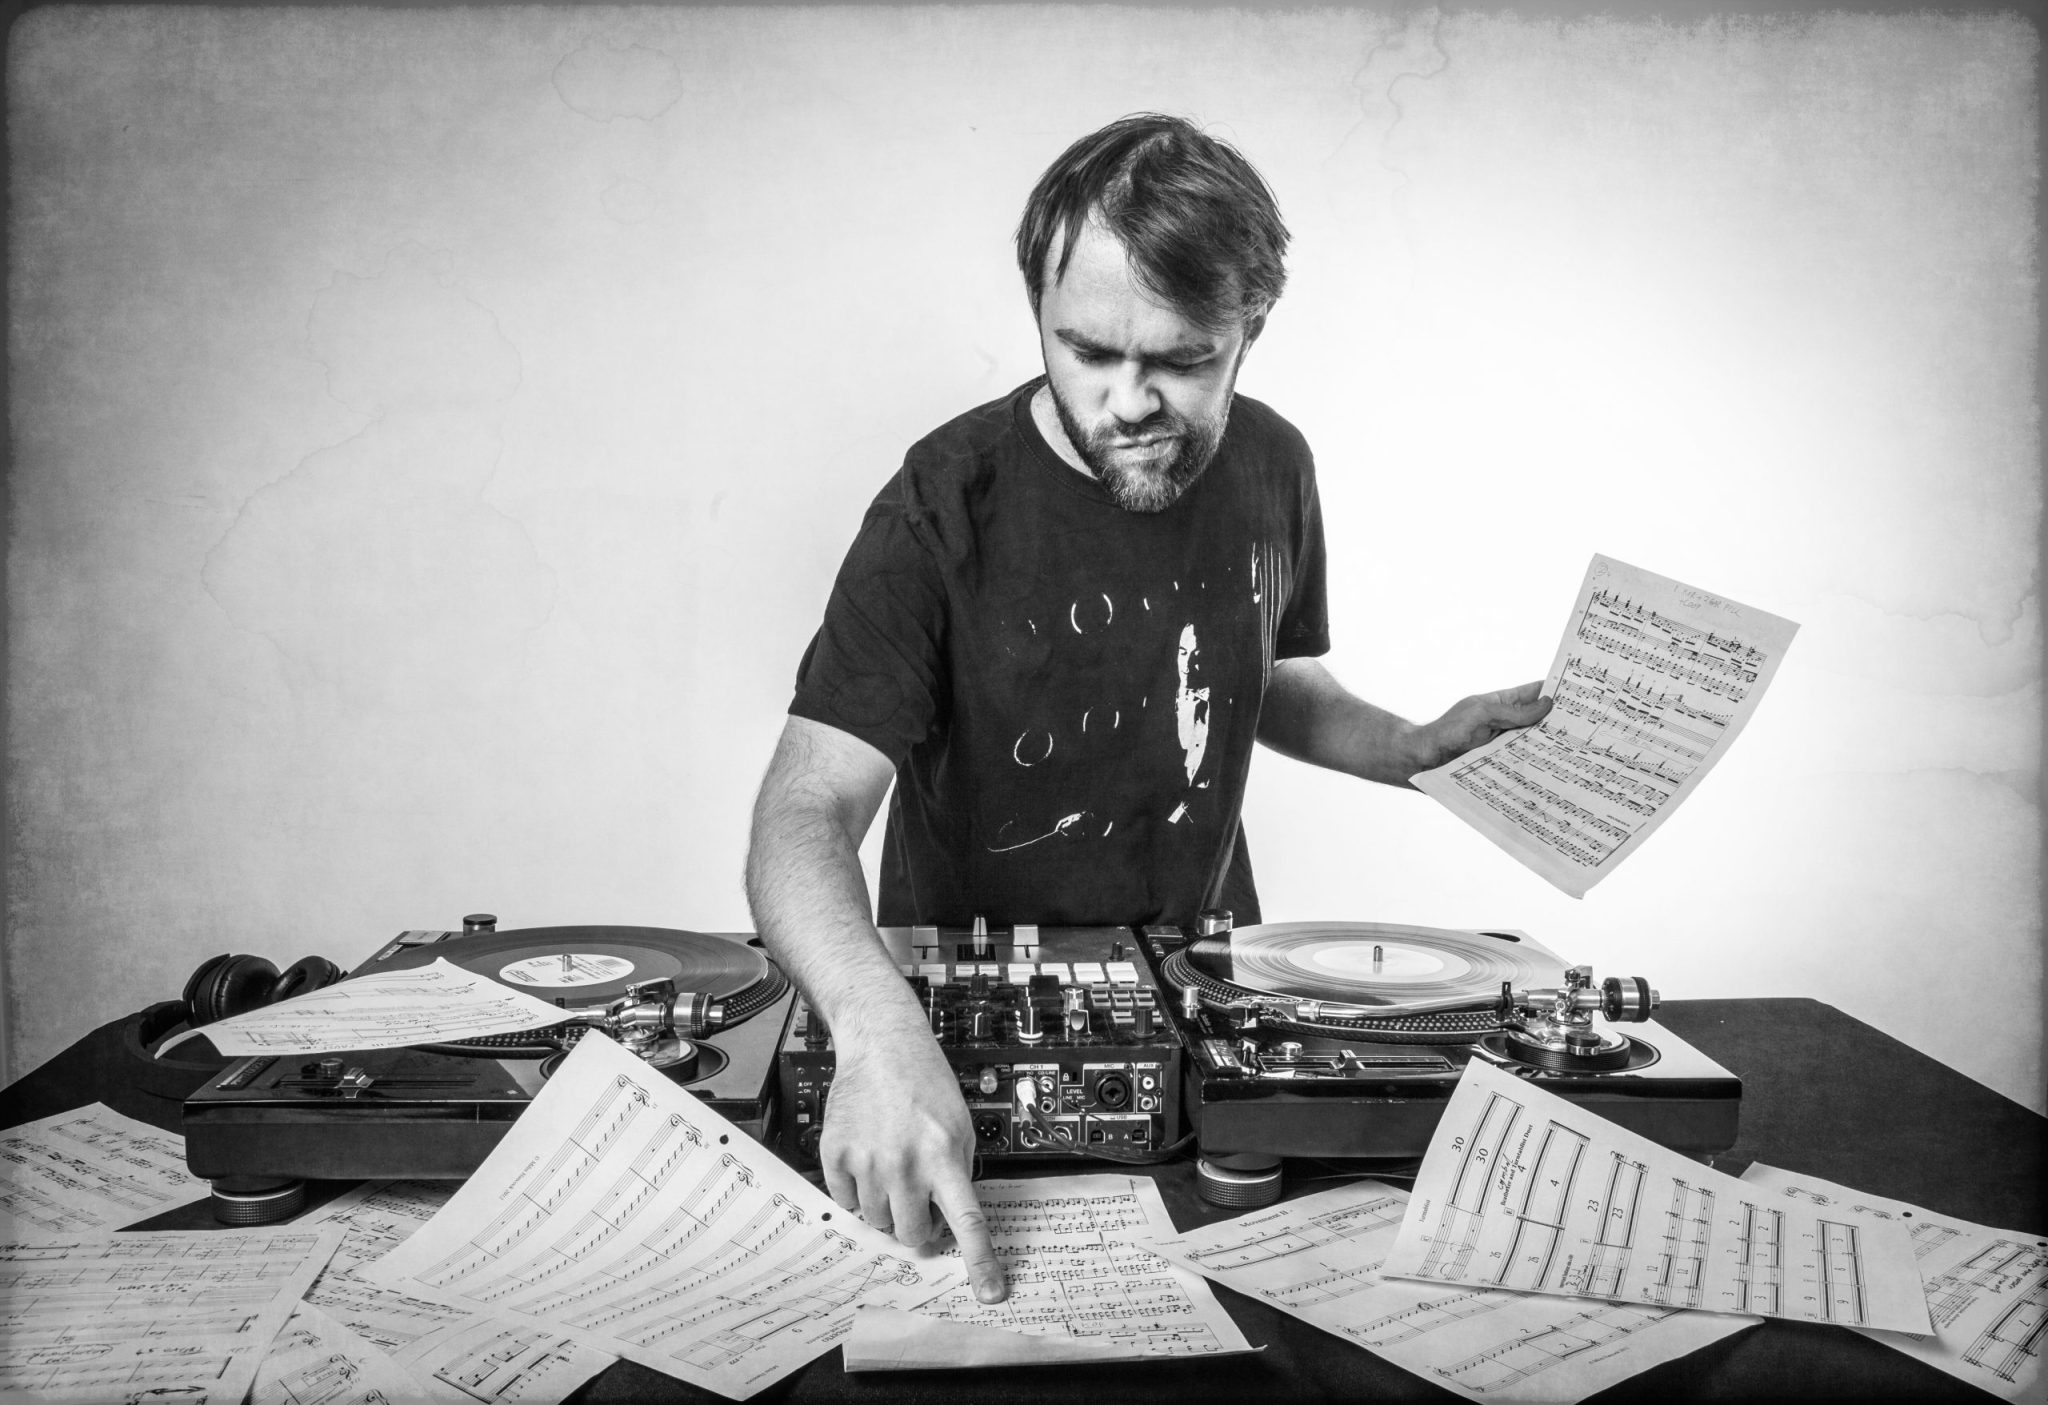 Concerto For Turntables & Orchestra — making music, not just playing it